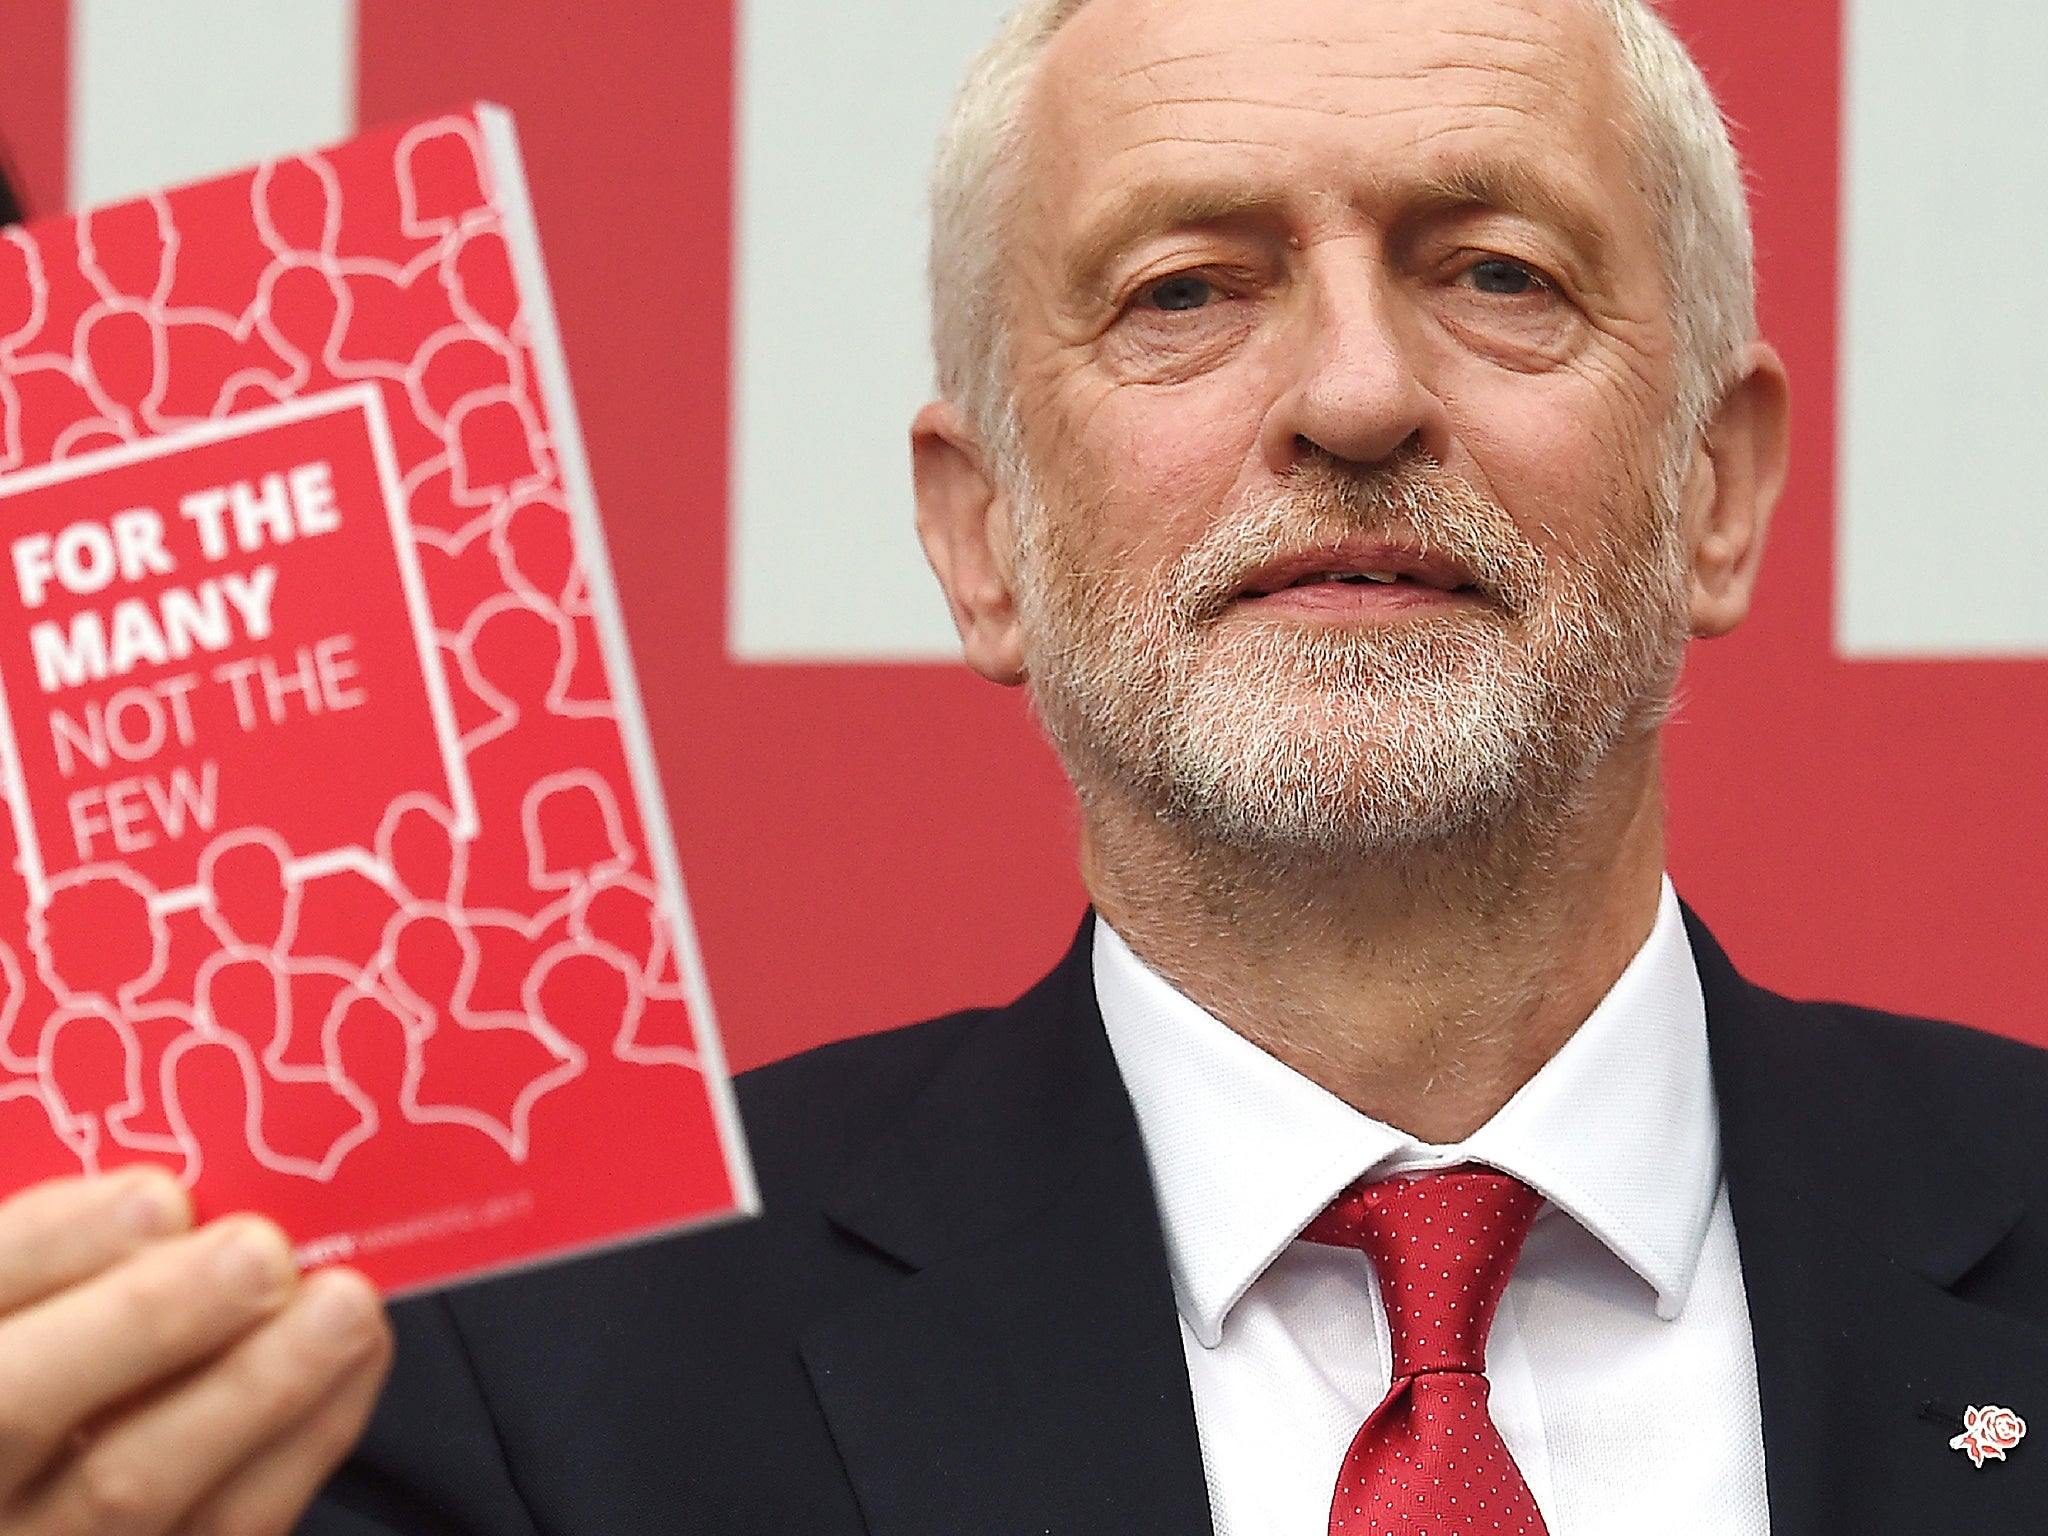 Jeremy Corbyn poses with a copy of the Labour election manifesto after the launch in Bradford